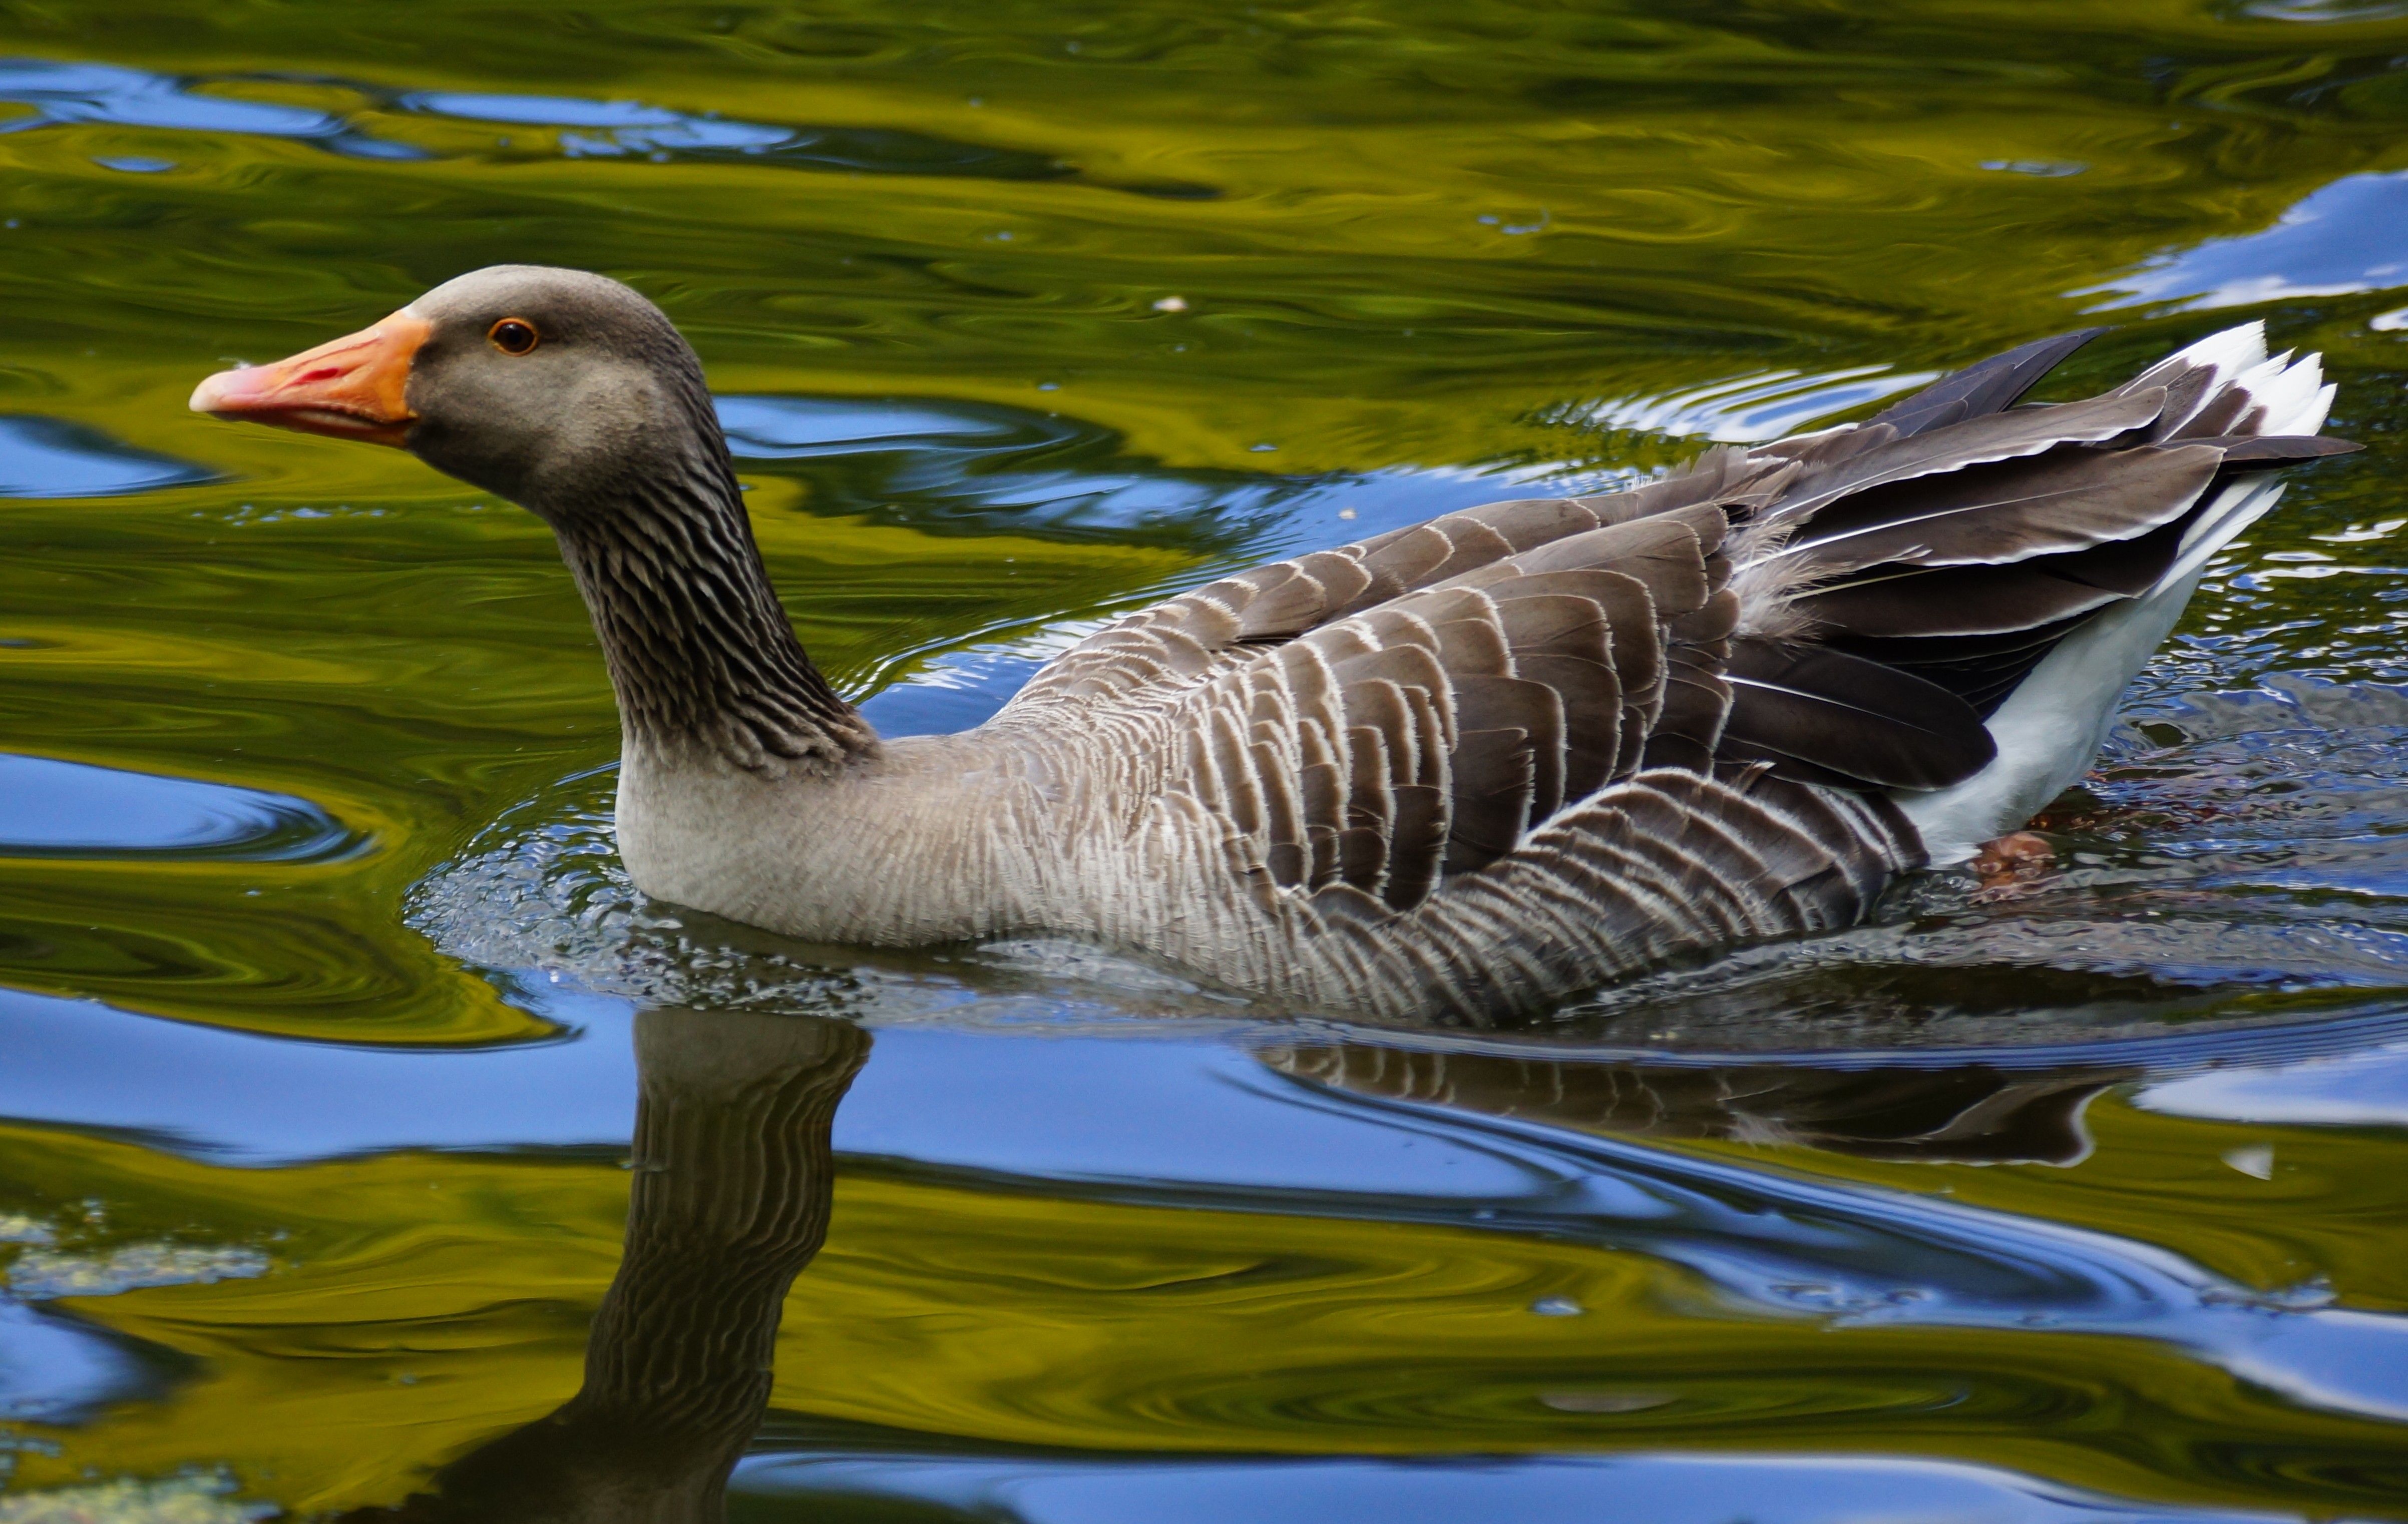 Goose 4k Ultra HD Wallpaper and Background Image | 4810x3045 | ID:6364464810 x 3045